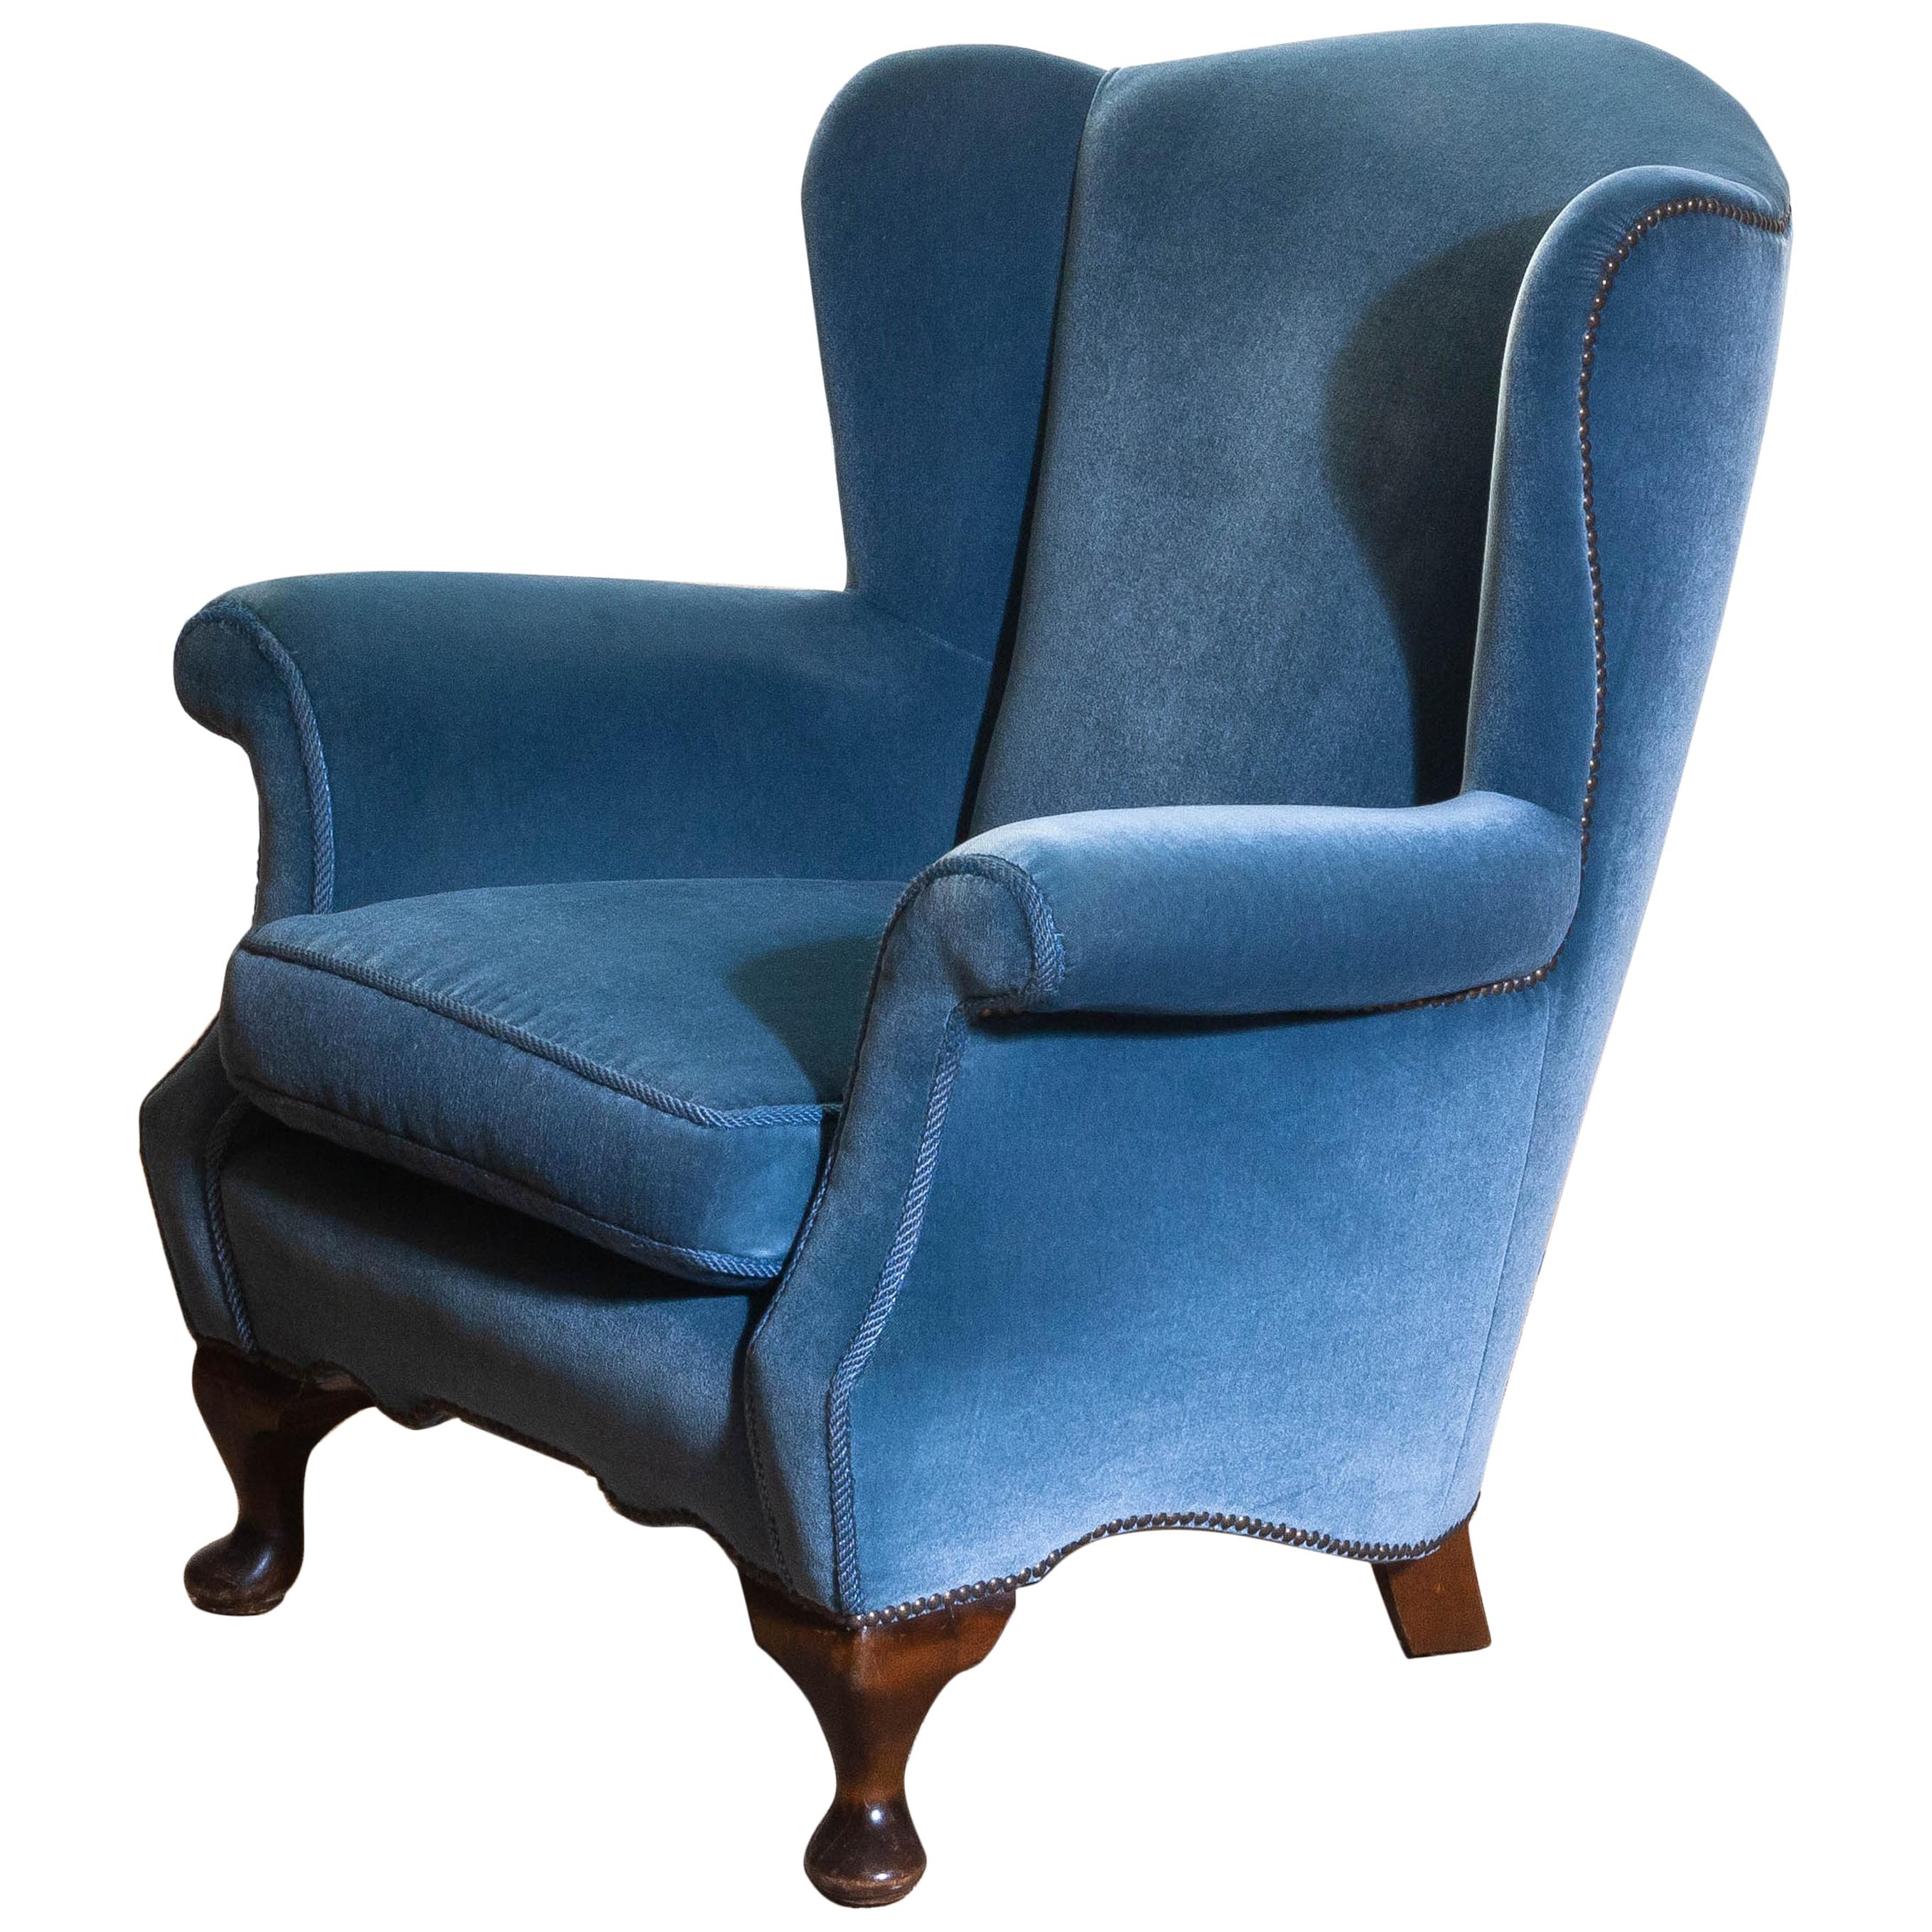 Unique and extremely beautiful Hollywood Regency club chair in blue velvet from the 1920s.
The chair is completely restored in 1987 (only original materials are used).
The overall condition of this chair is very comfortable and good